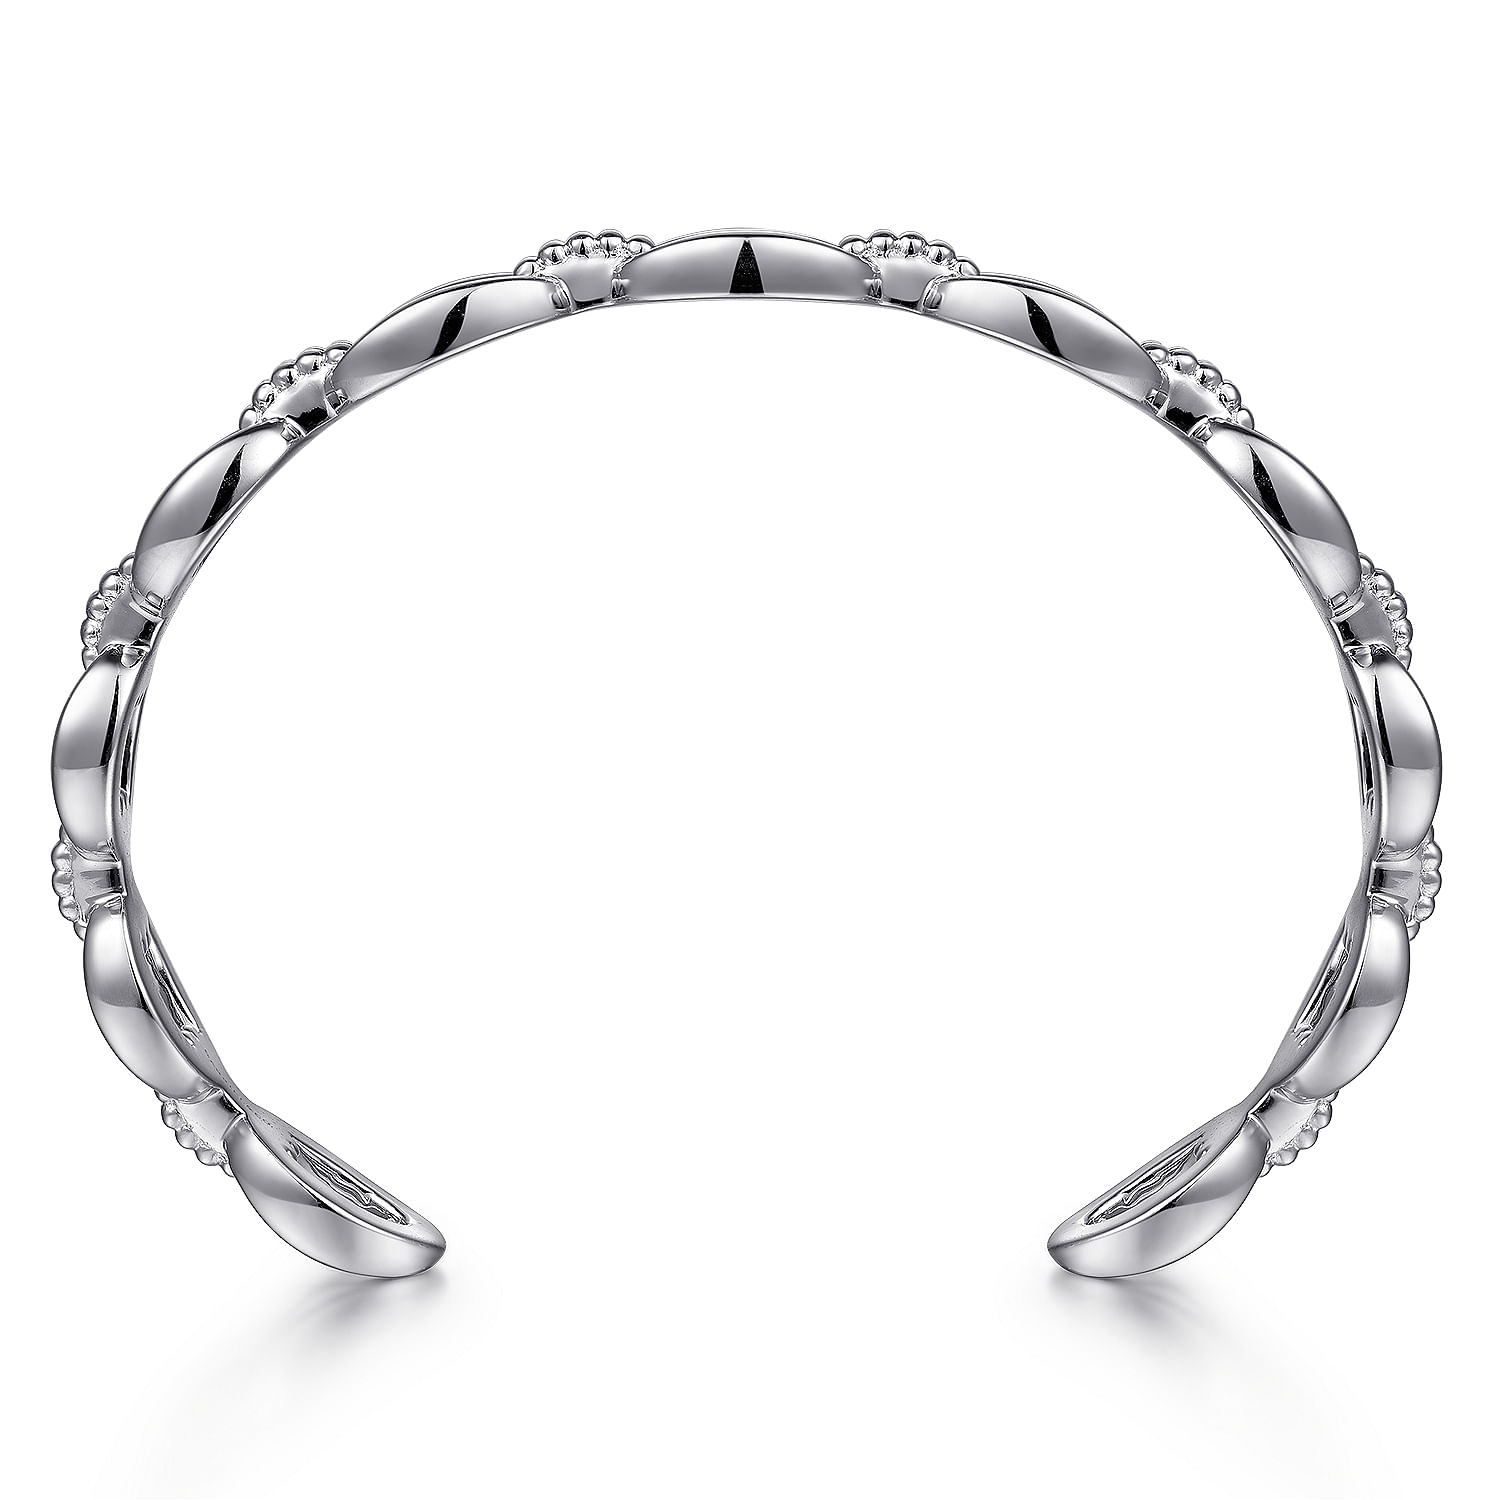 Sterling-Silver-Oval-Link-Cuff-Bangle3